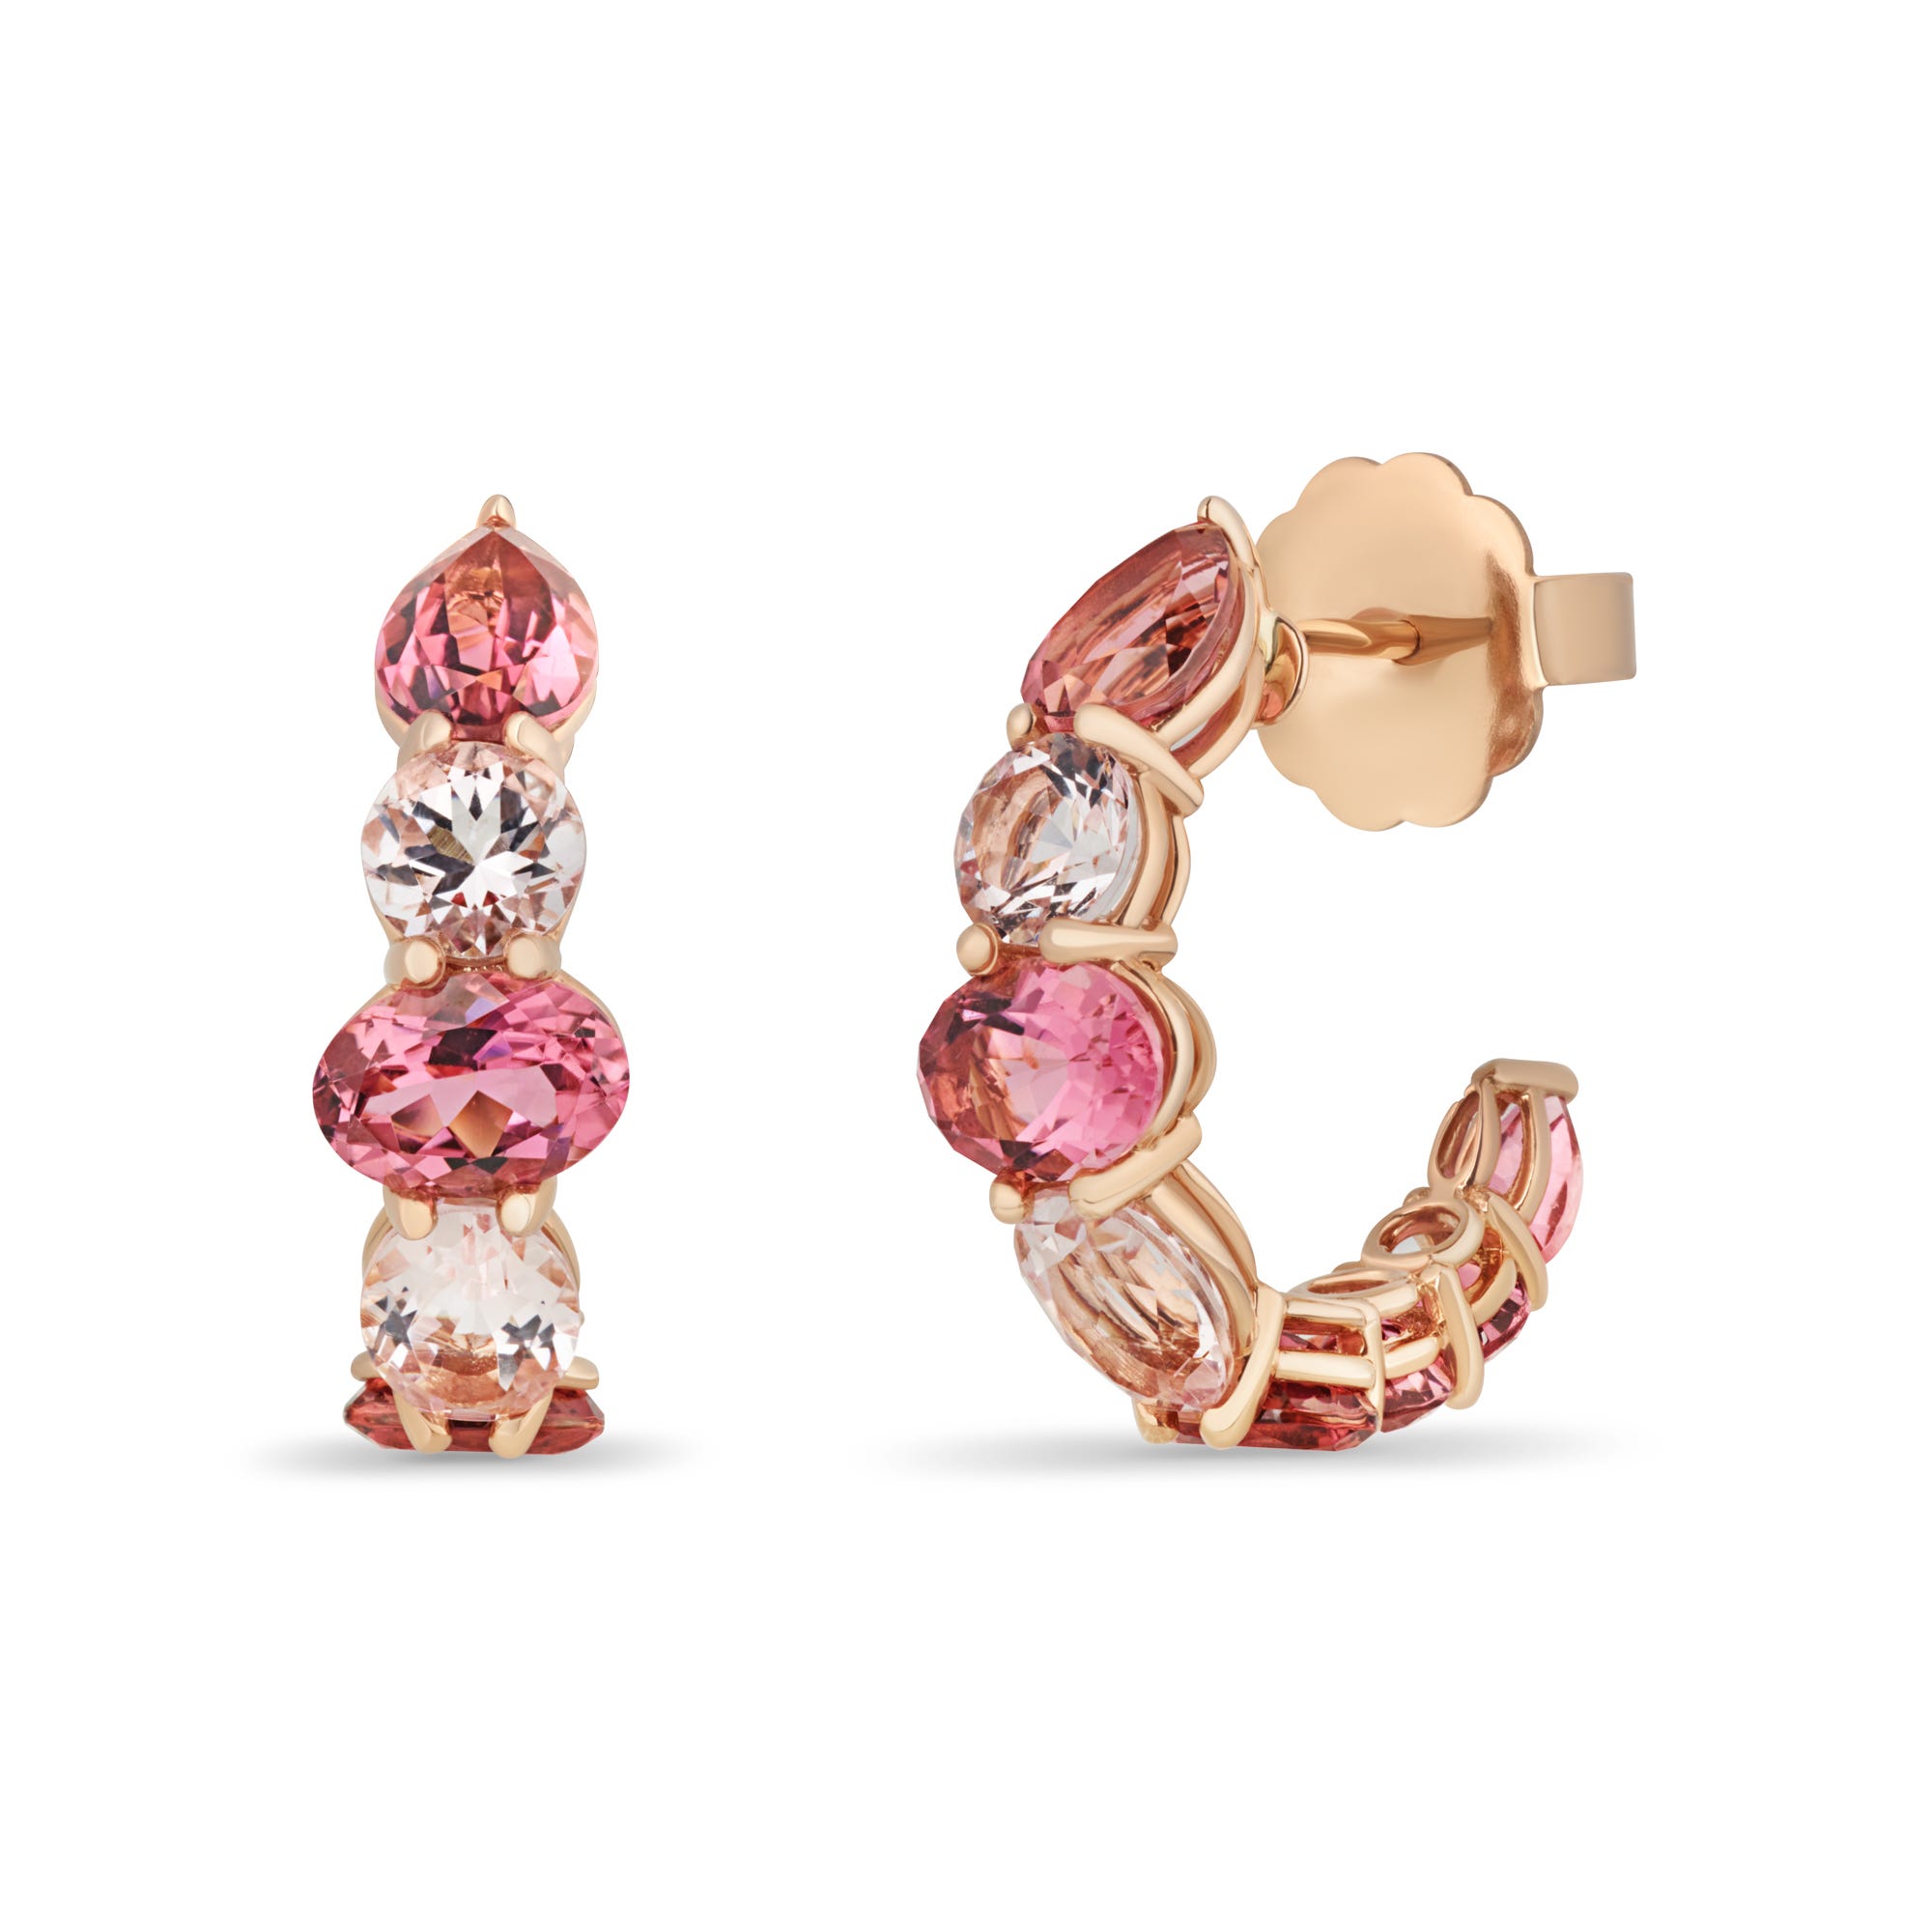 Chaos Mini Earrings in 18ct Rose Gold with Morganite and Pink Tourmaline